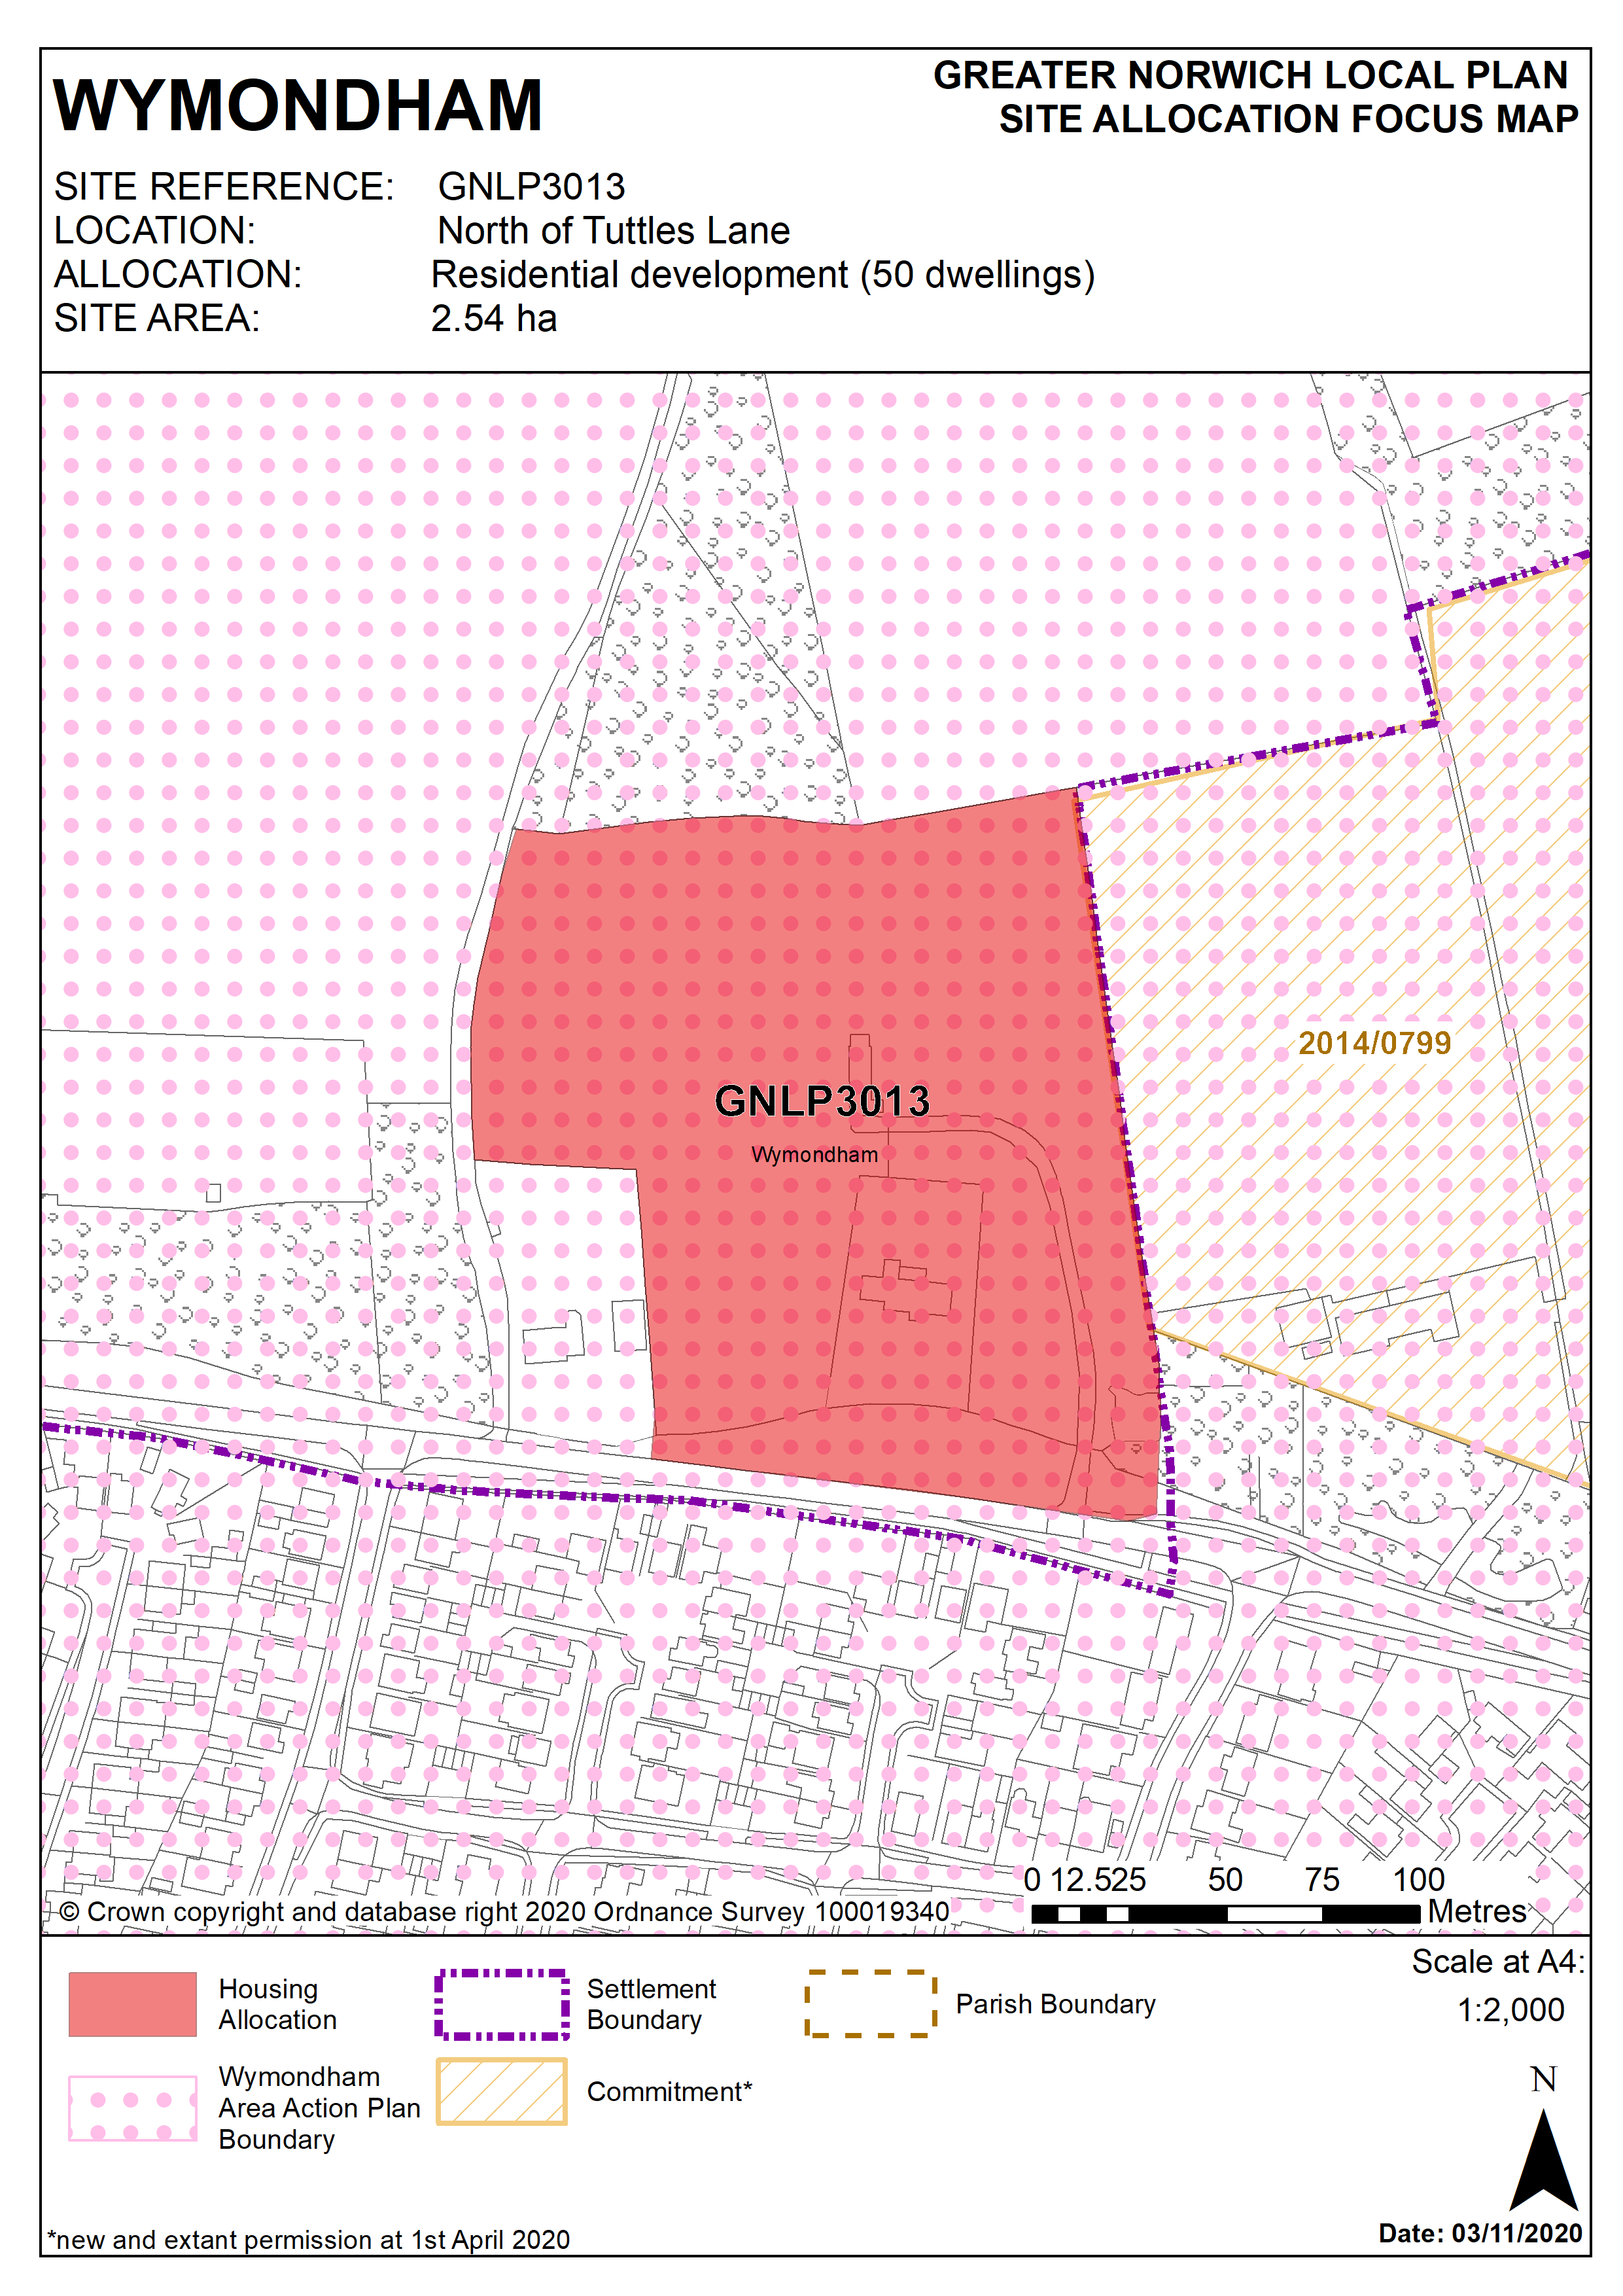 GNLP3013 Policy Map